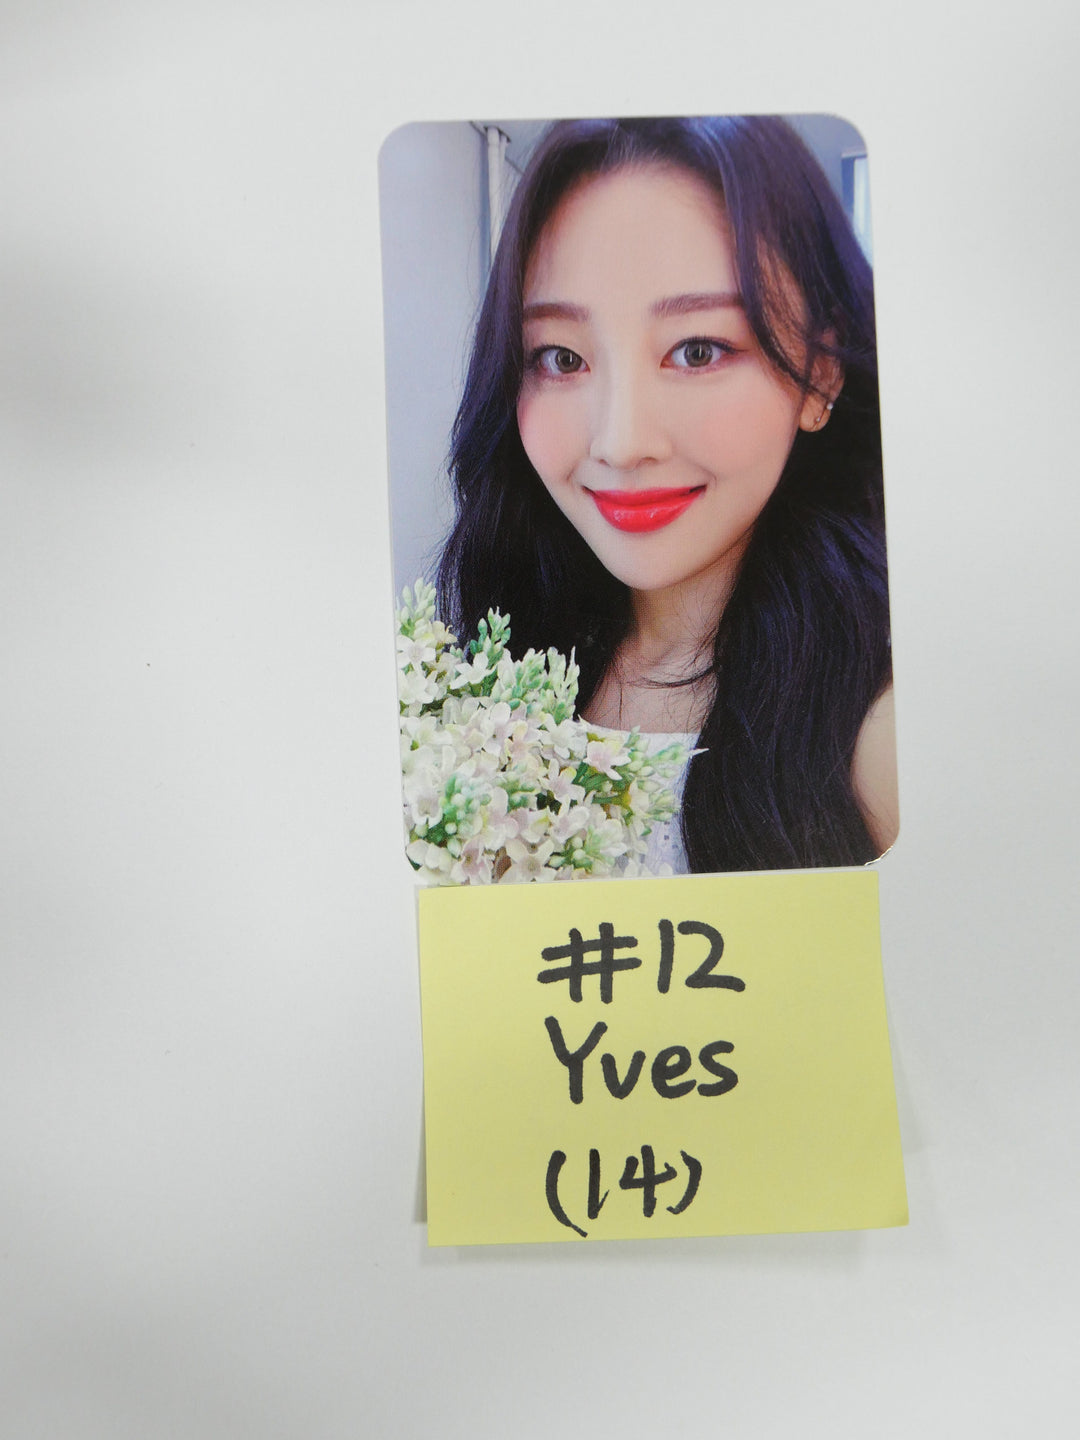 Loona '&' - Official Photocard (JinSoul, Choerry, Yves) (Mass Updated 9-2)